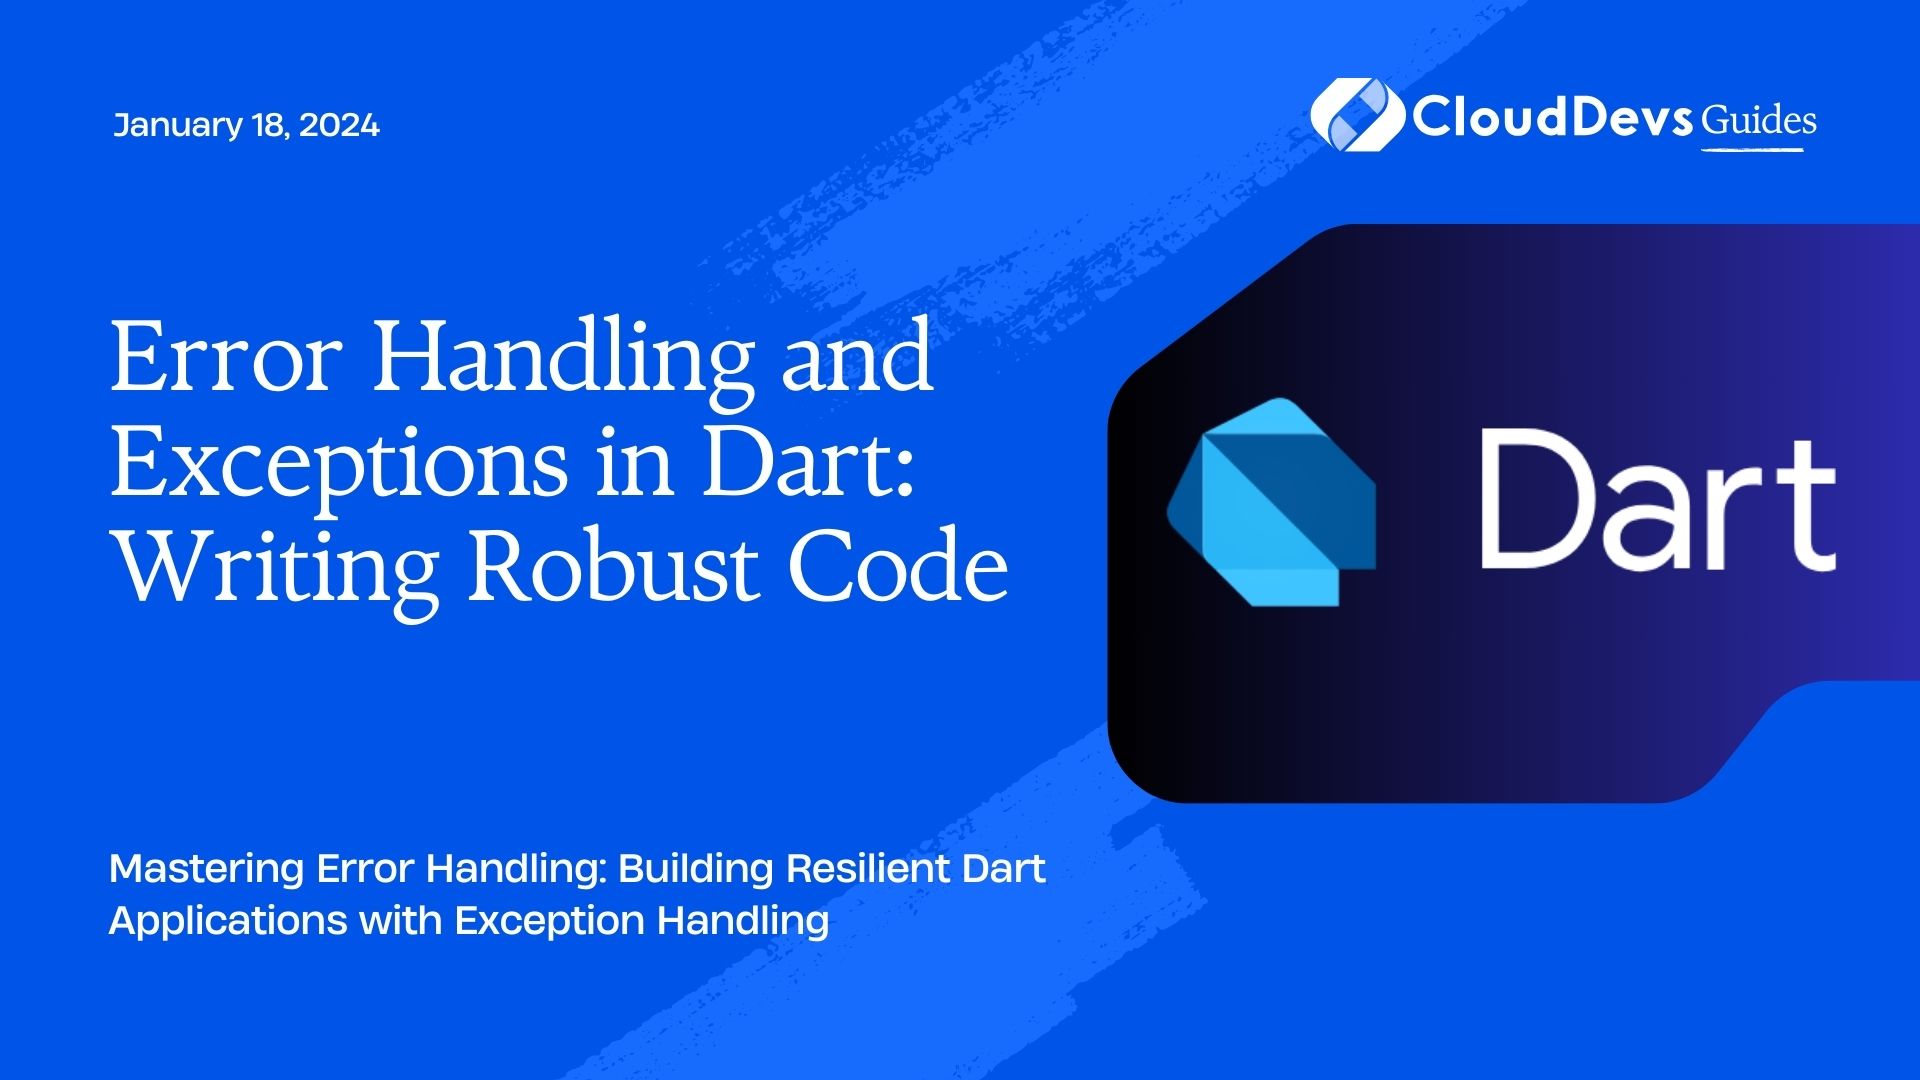 Error Handling and Exceptions in Dart: Writing Robust Code